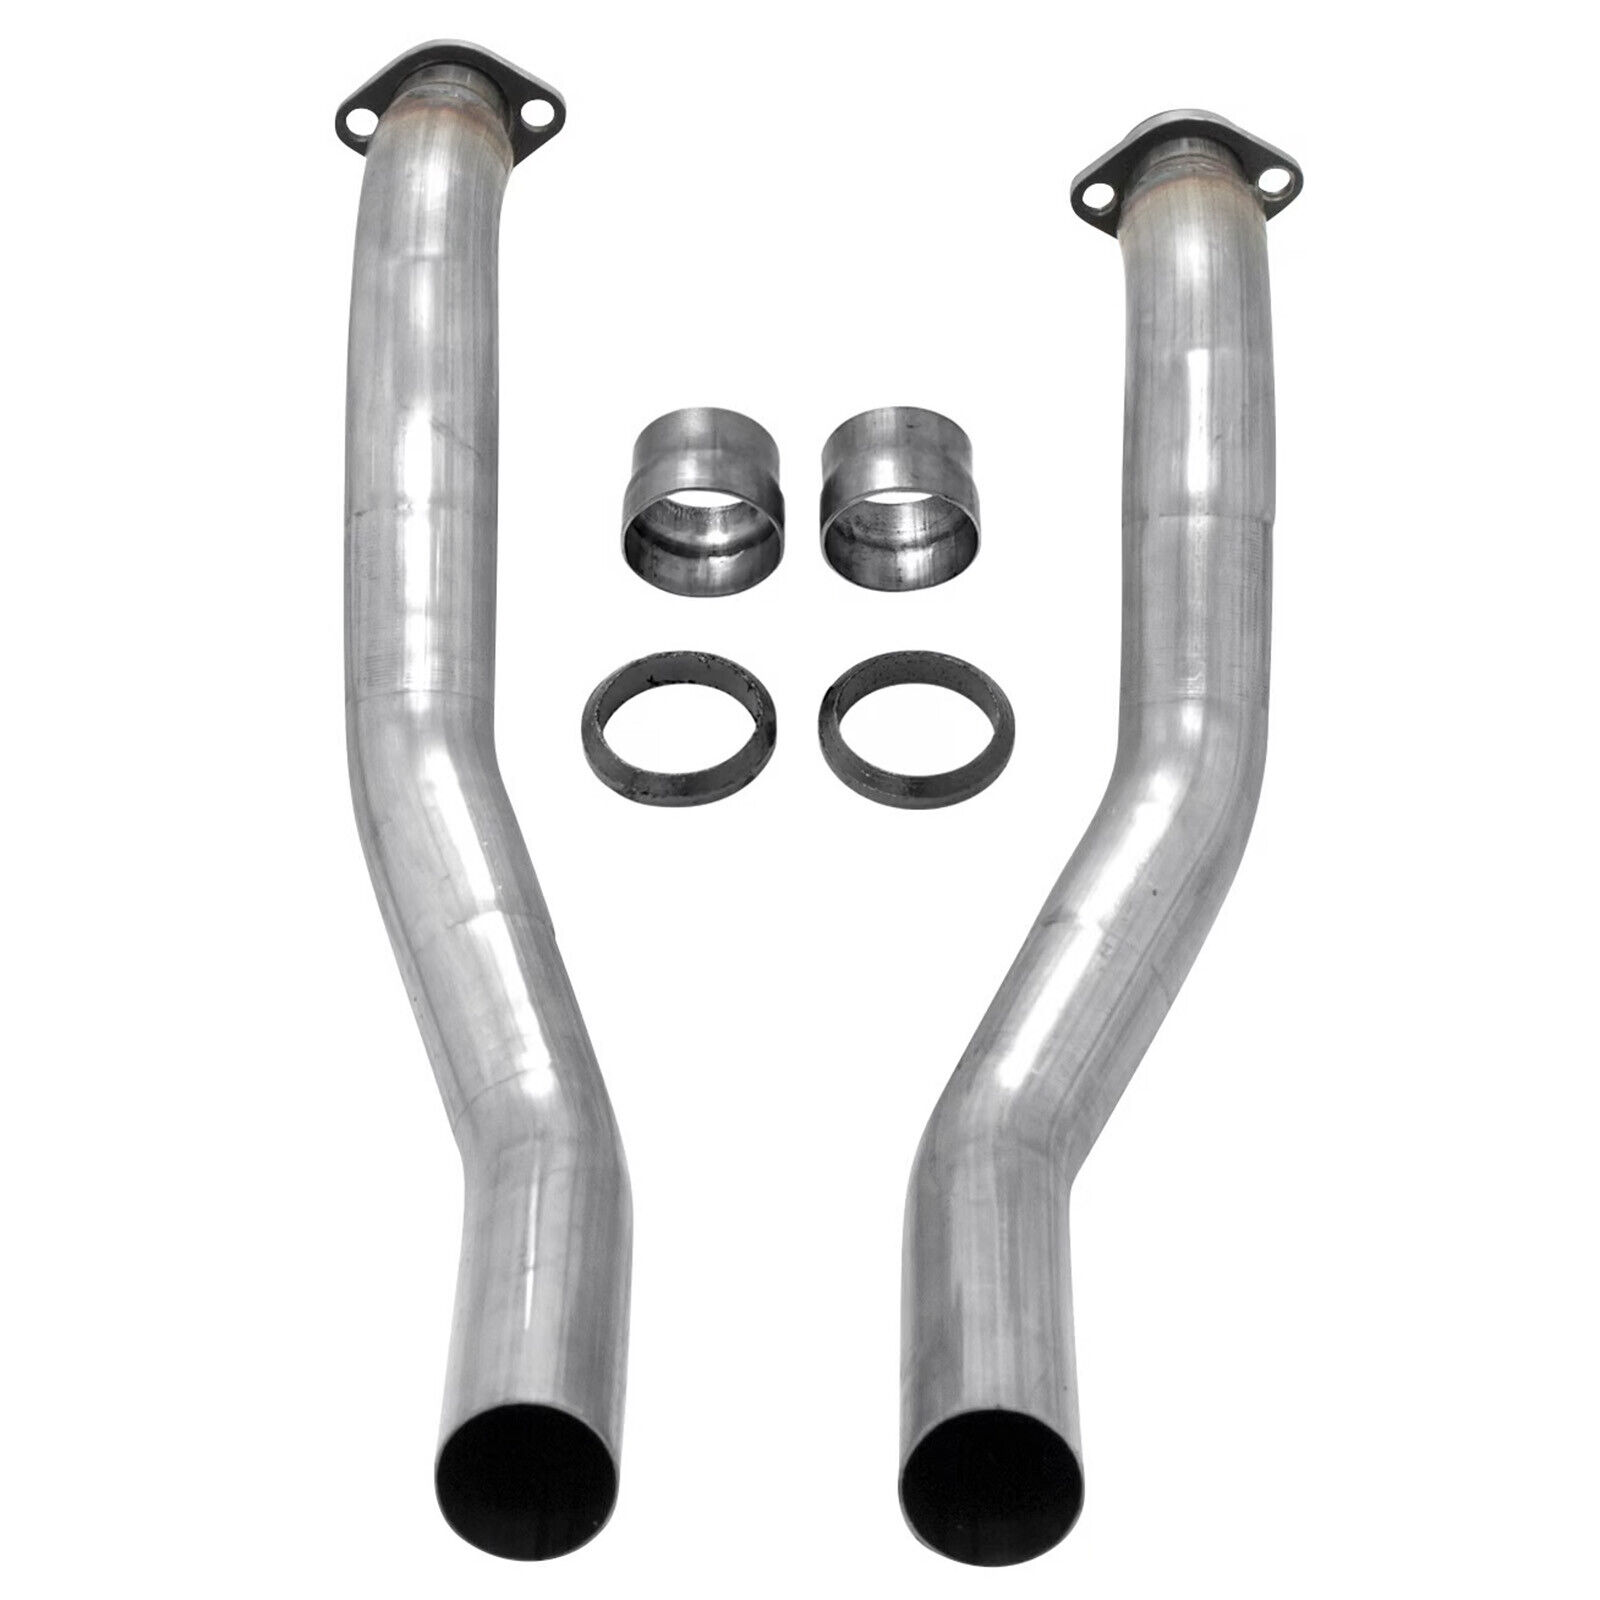 Flowmaster Stainless Dual Manifold Downpipes for 64-66 Ford Mustang RWD 4.7L V8